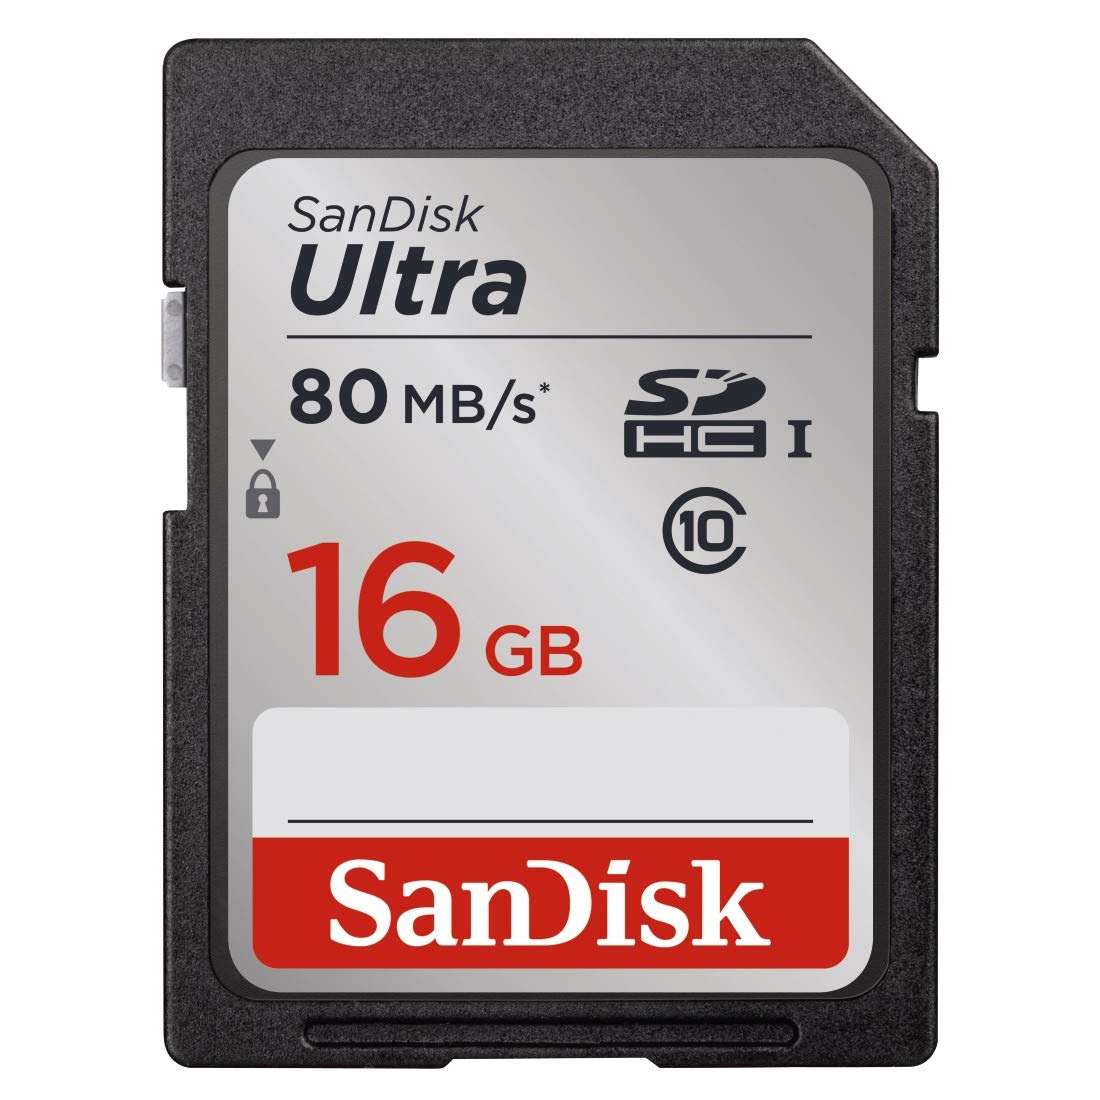 SanDisk Ultra Class 10 UHS-I 16GB SDHC ,Memory Card (80 MB/s)-Memory Cards-dealsplant